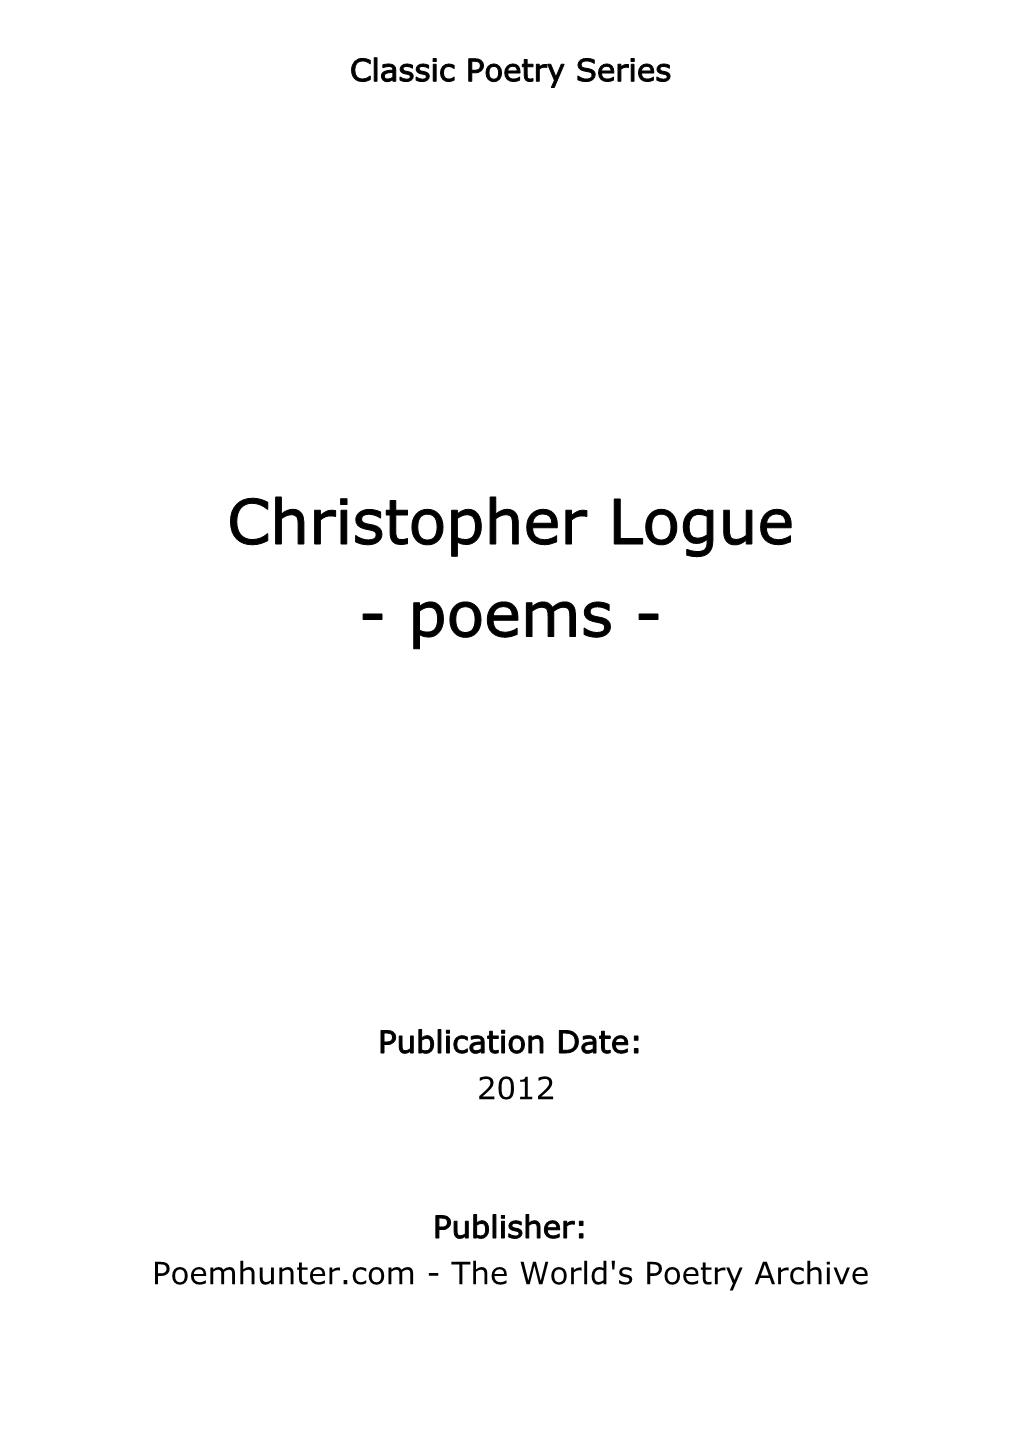 Christopher Logue - Poems